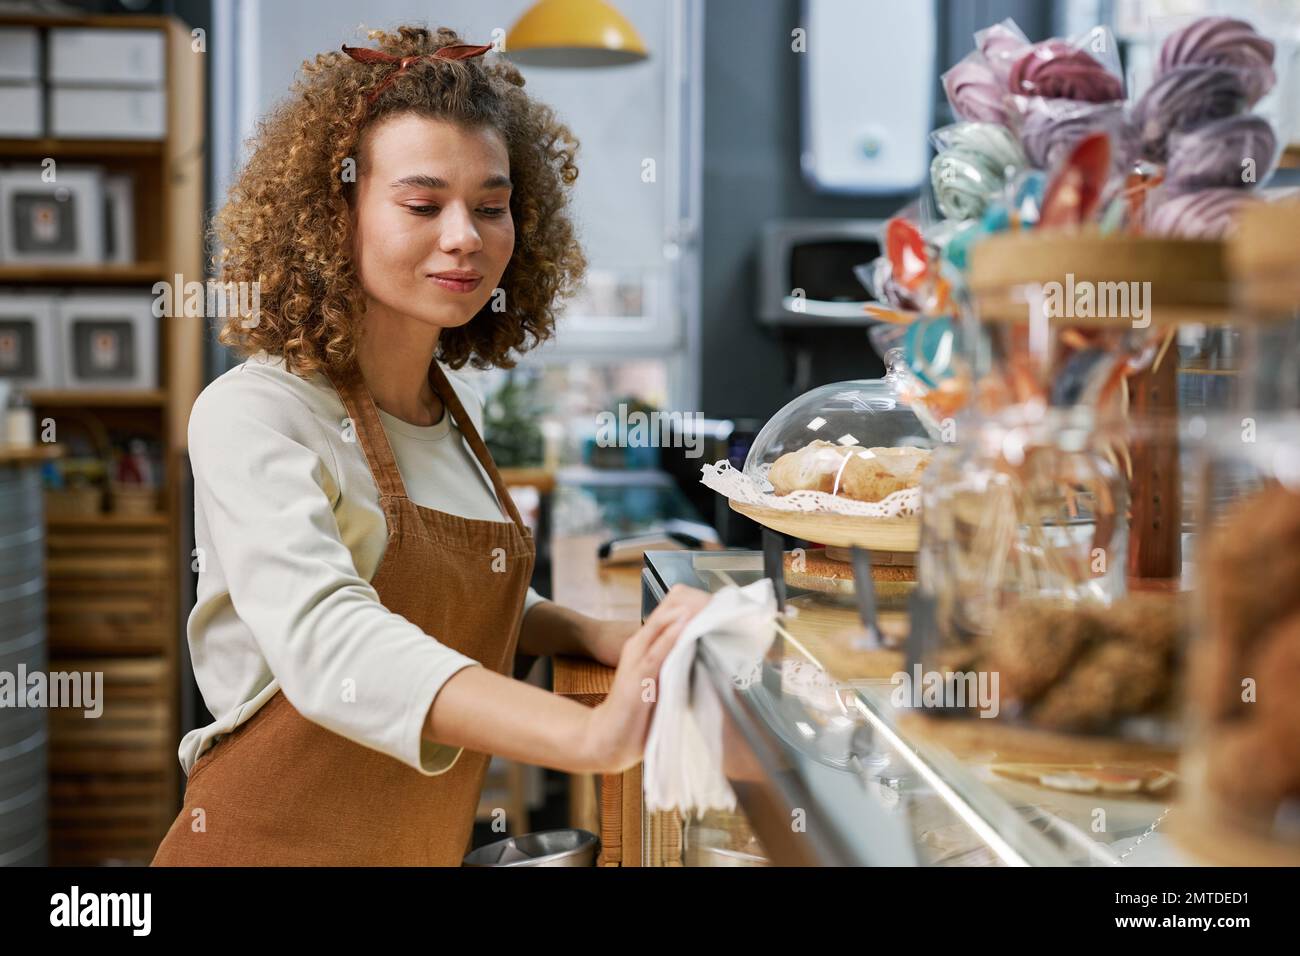 Smiling small bakery owner cleaning counter with disinfectant and soft cloth before opening Stock Photo